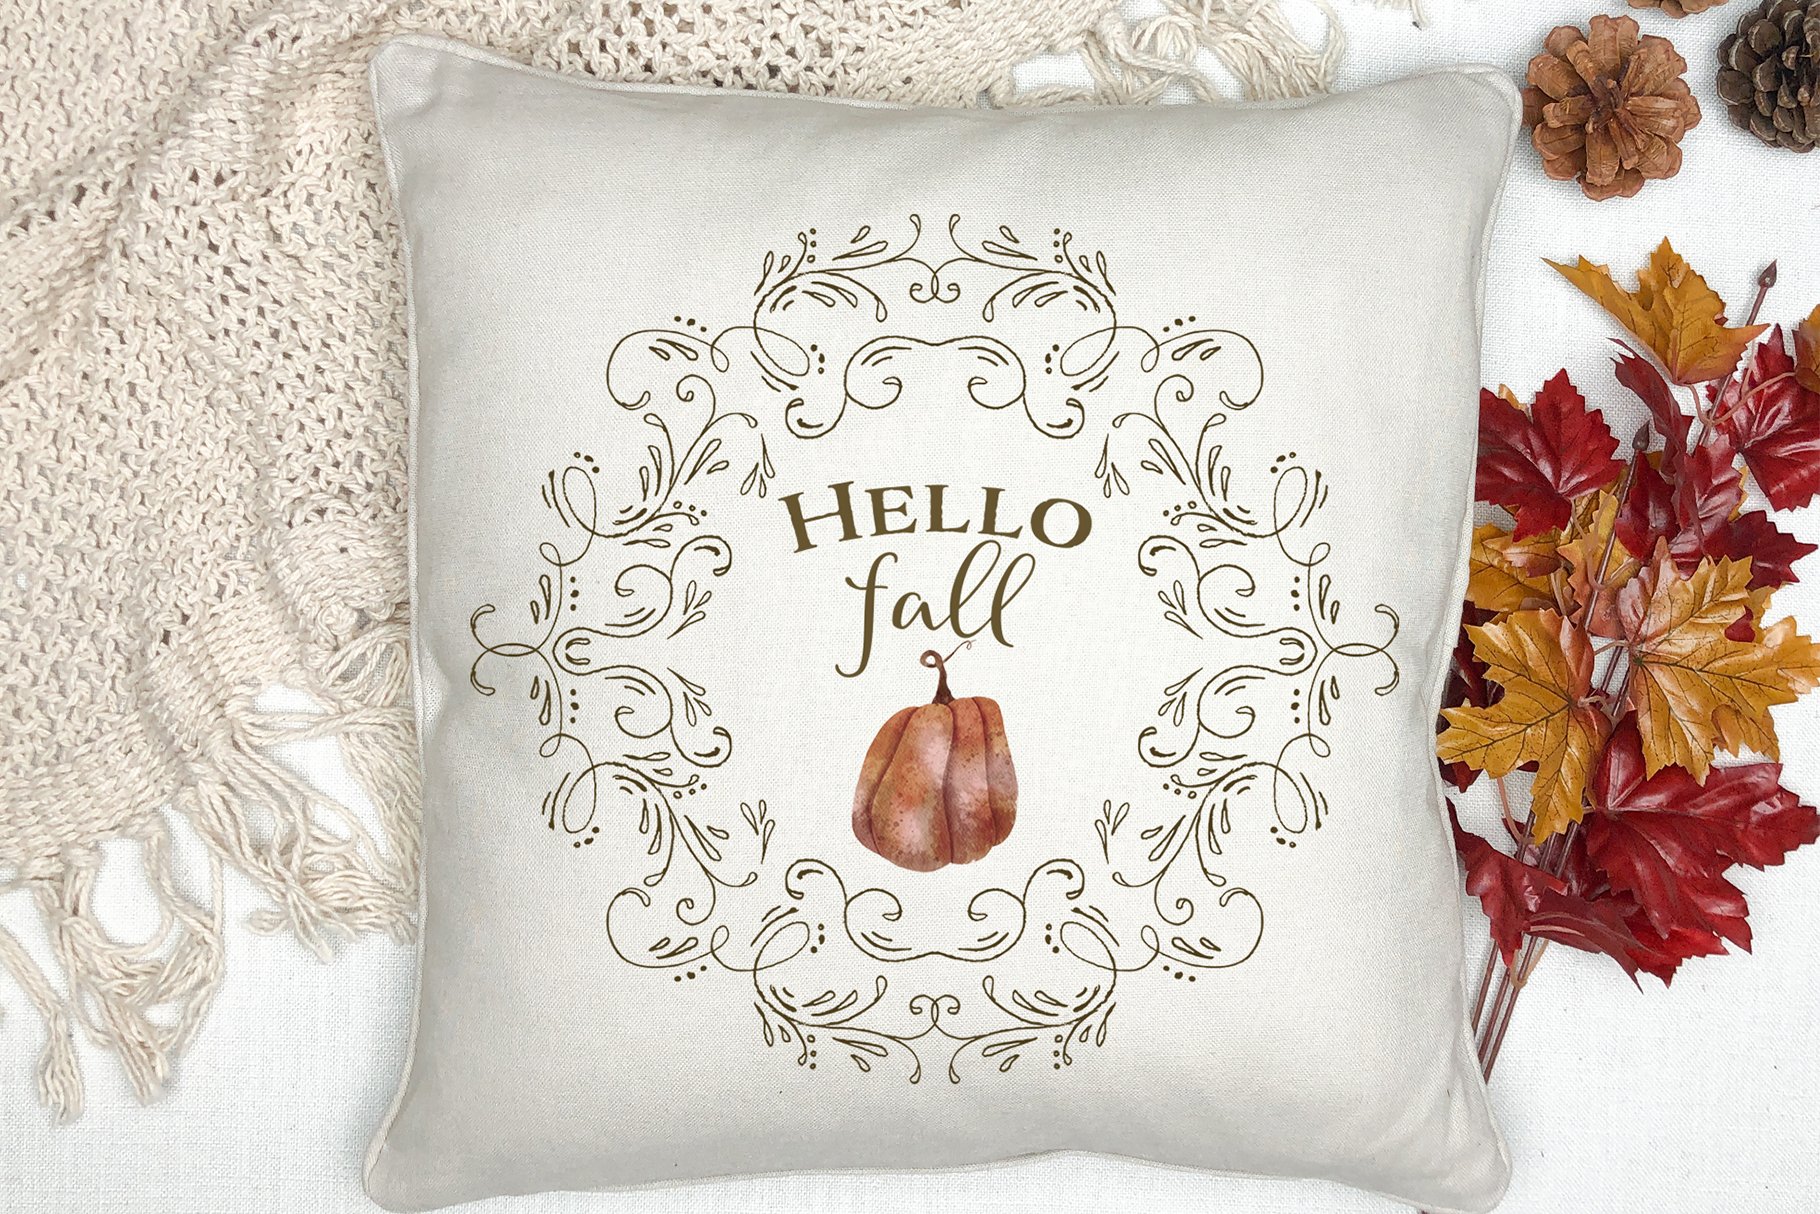 Decorate pillow with a pretty embroidery.